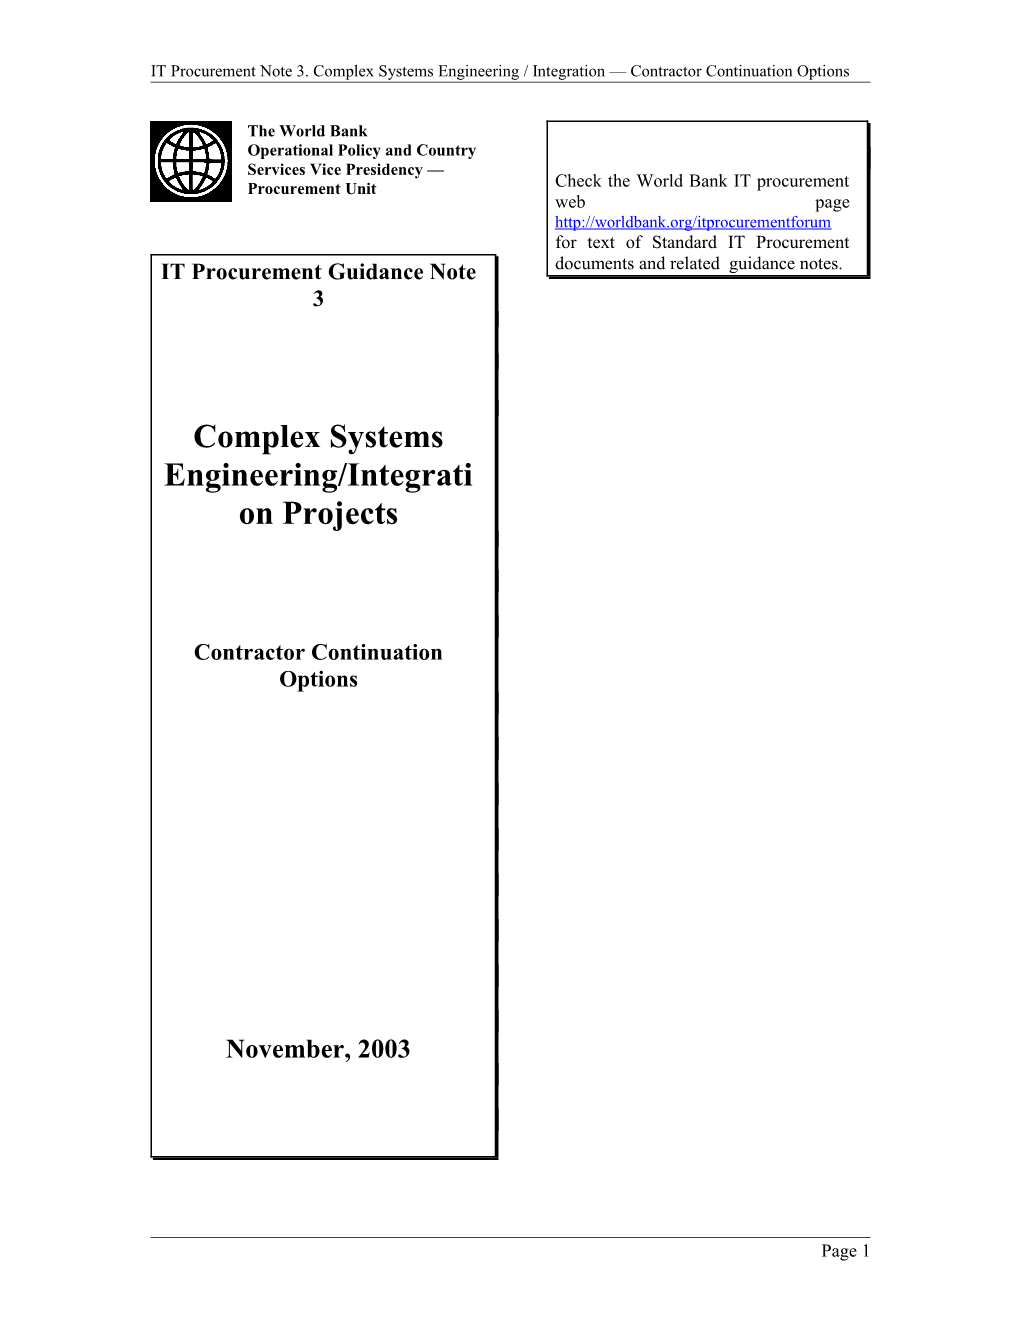 Procurement of Complex Systems Engineering Services Competitive Continuation Options